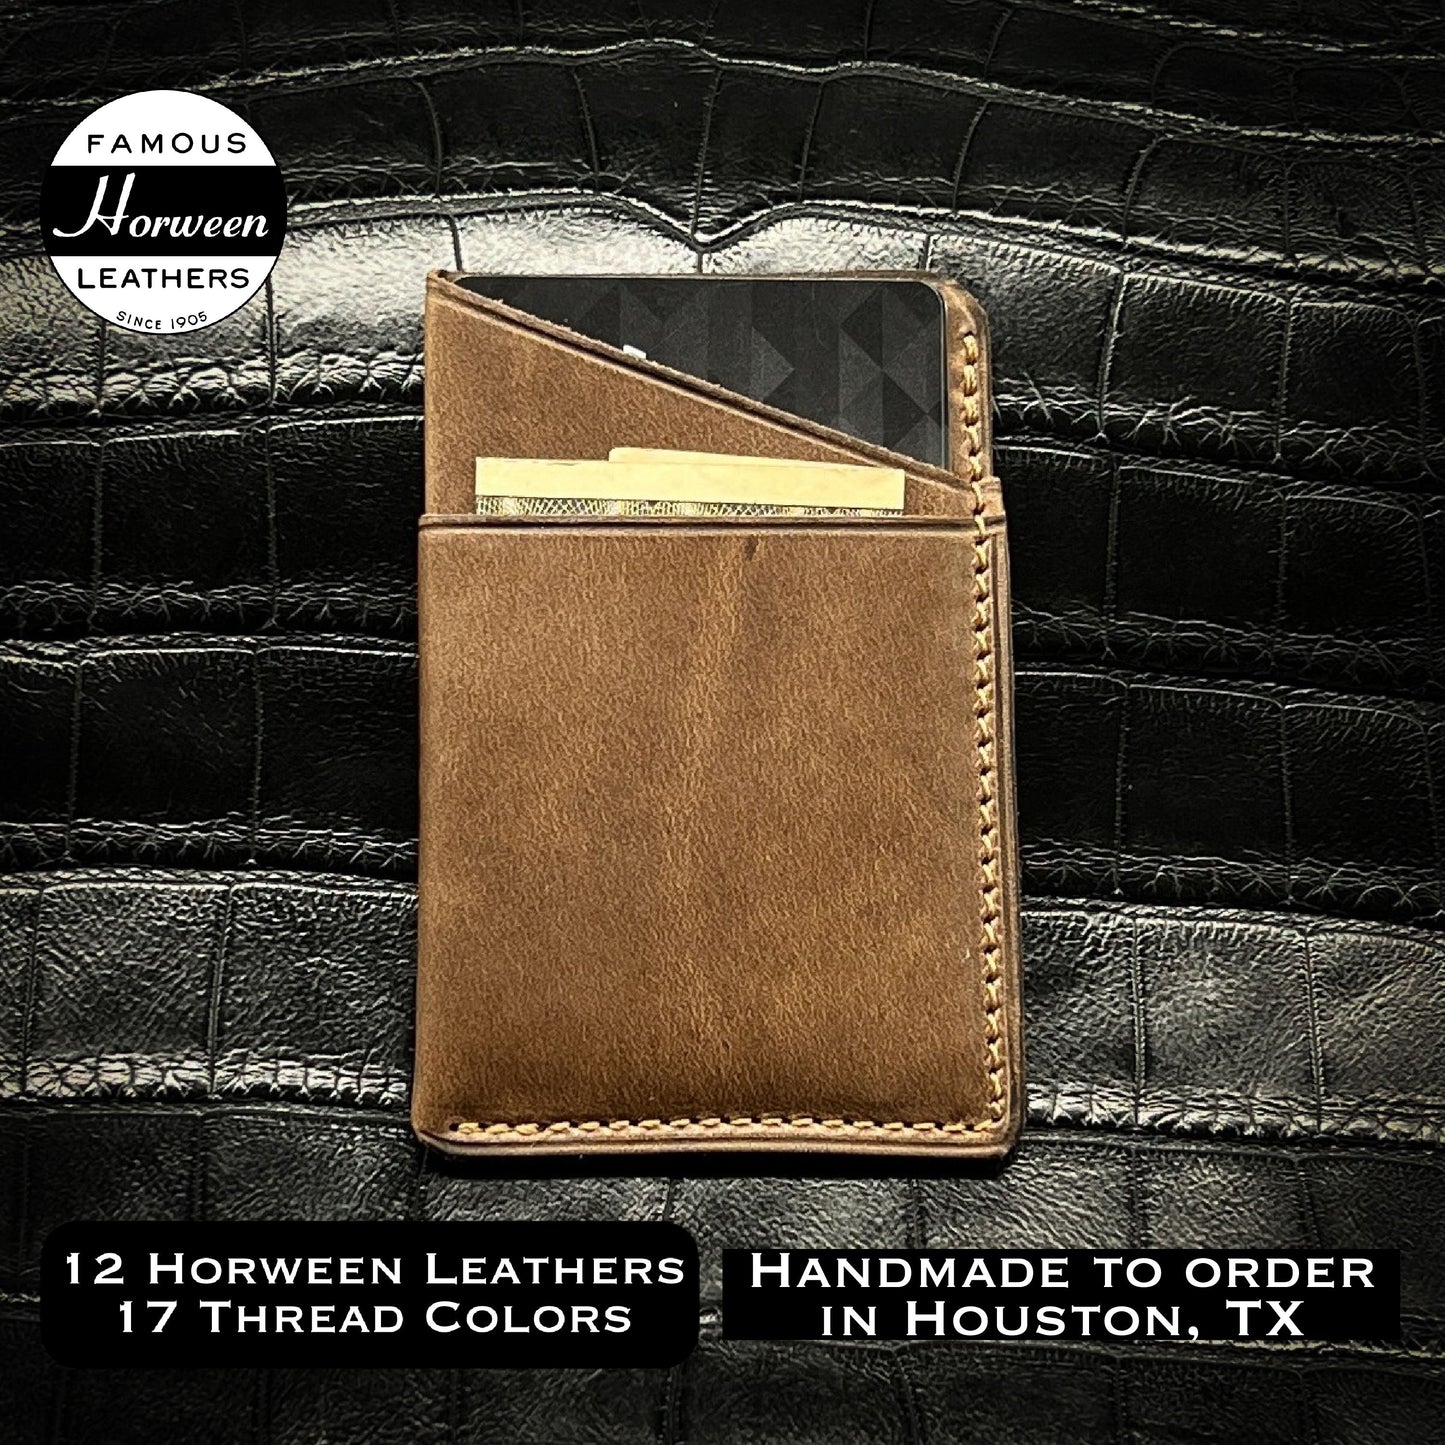 Custom EDC3 Minimalist Wallet in Natural CXL Horween Leather | Handmade Compact EDC Small Mini Wallet by Custom Leather and Pen in Houston, TX